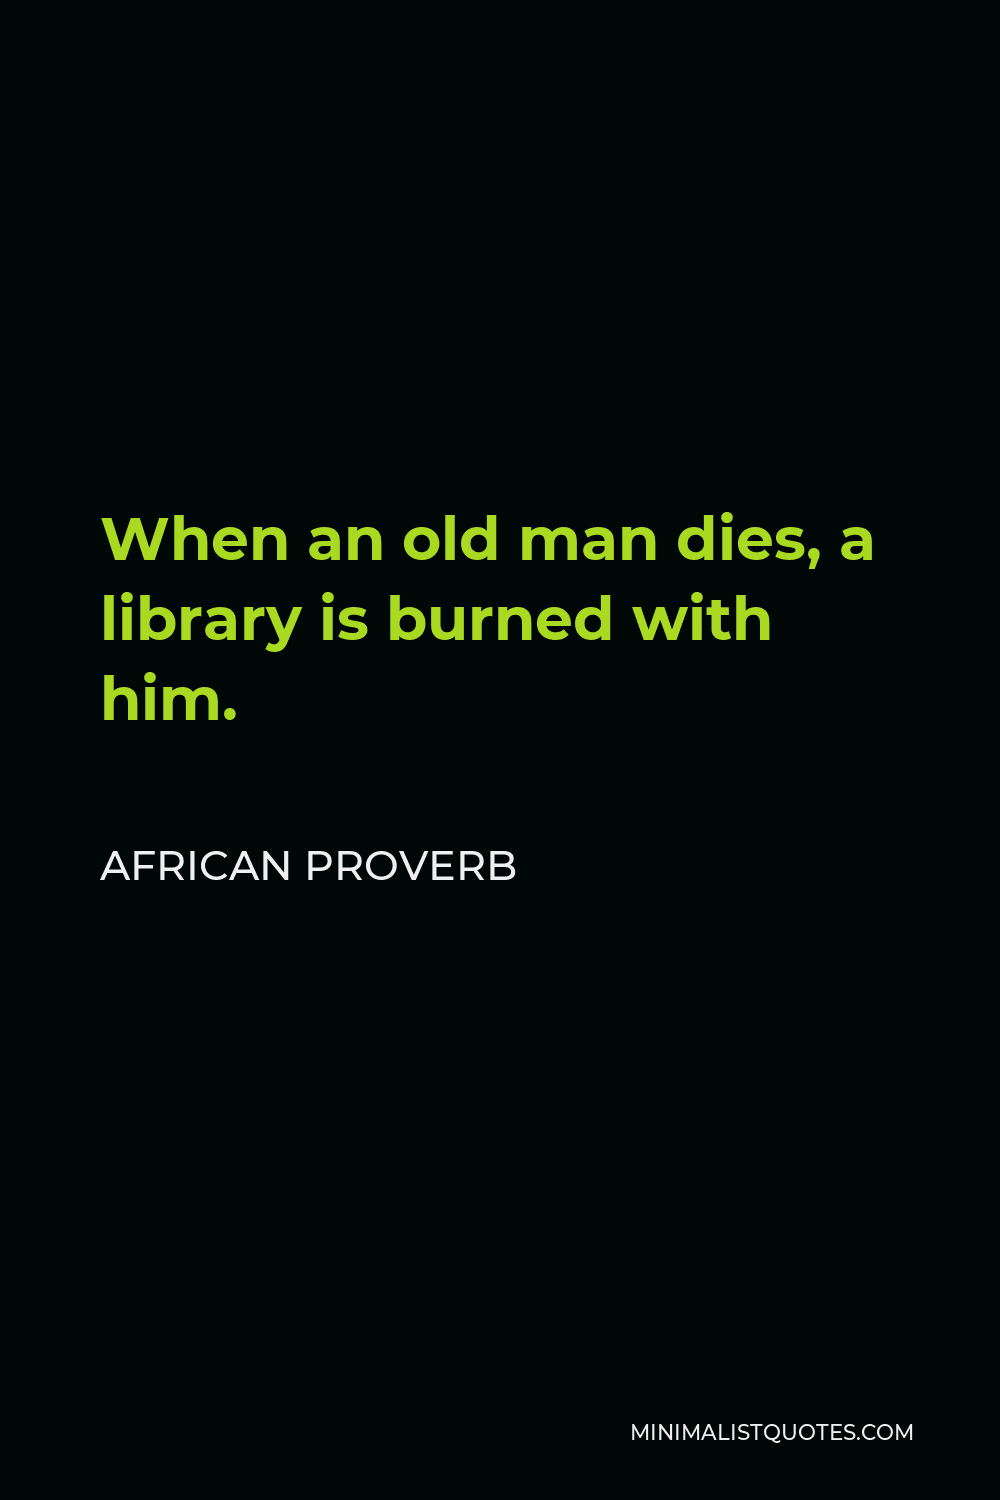 African Proverb Quote - When an old man dies, a library is burned with him.